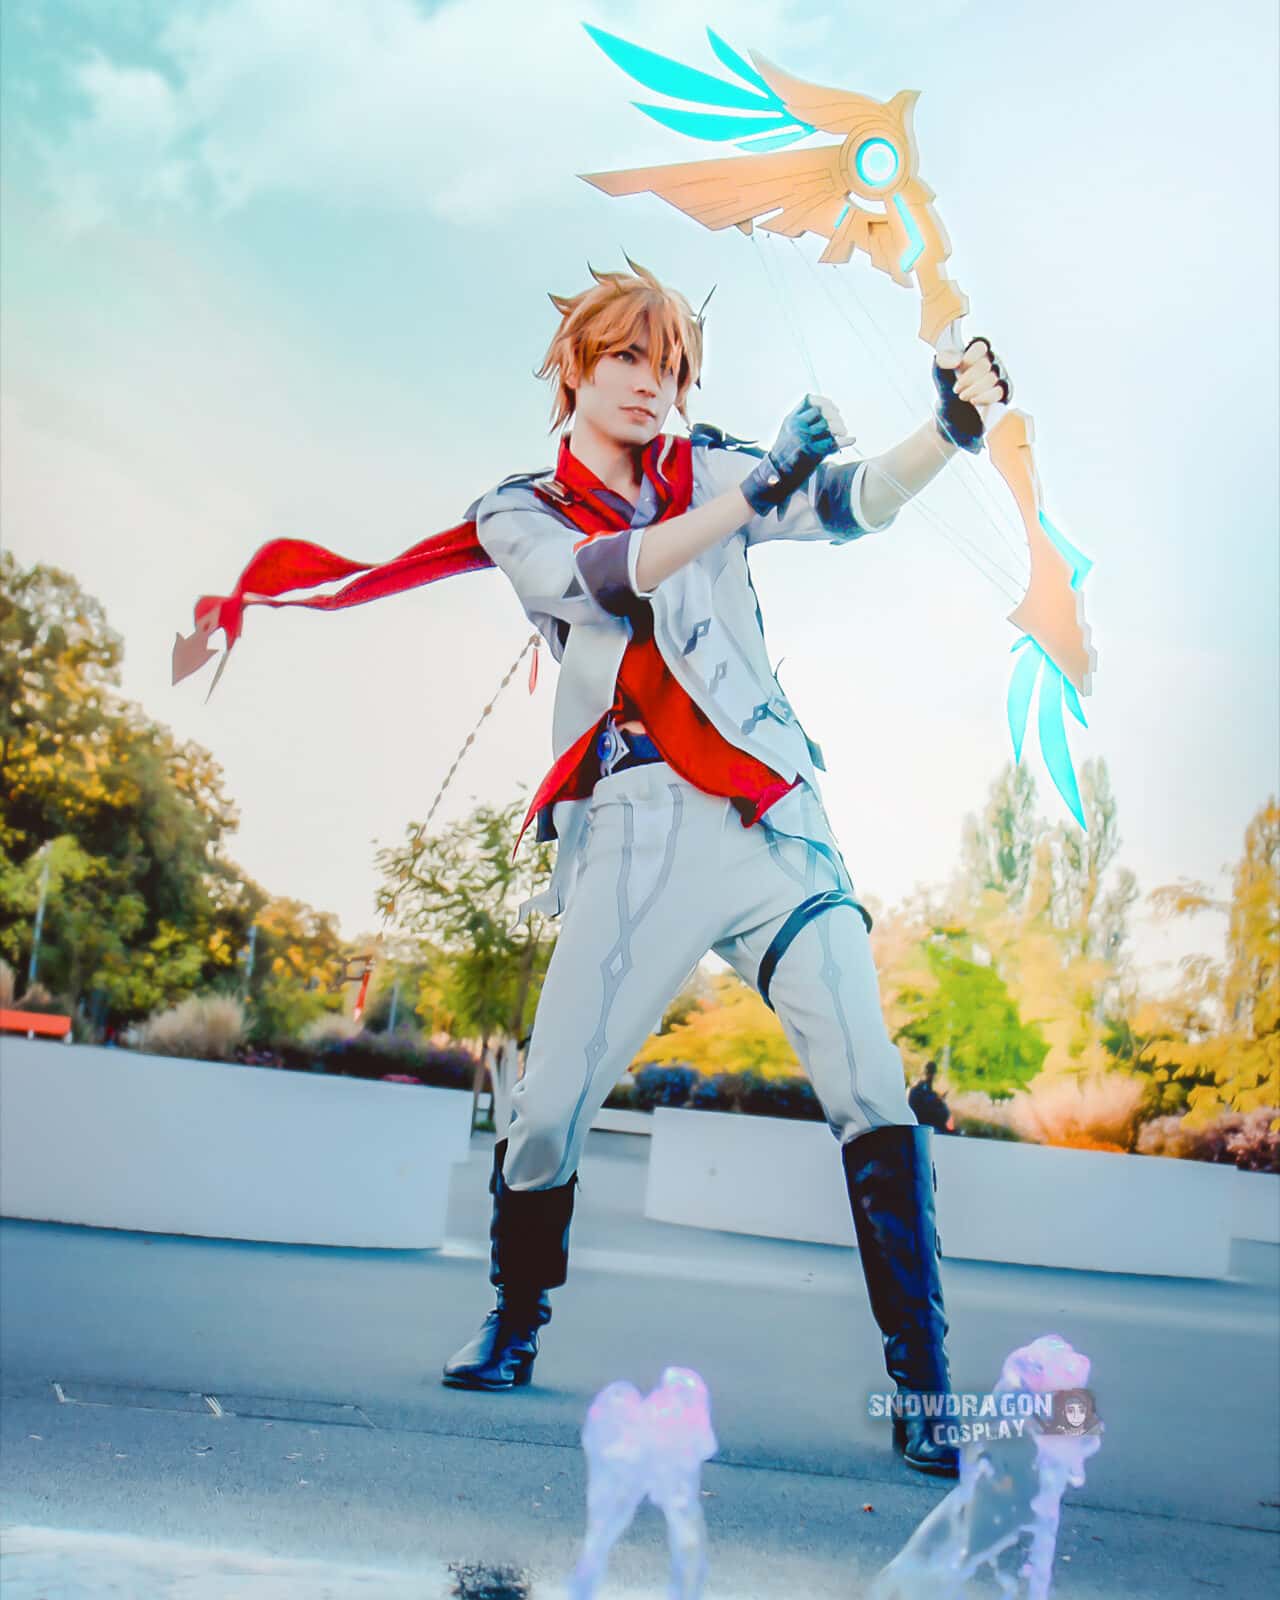 Turn Your Everyday Photos Into A Work Of Art With SnowDragons Cosplay Lightroom Edits